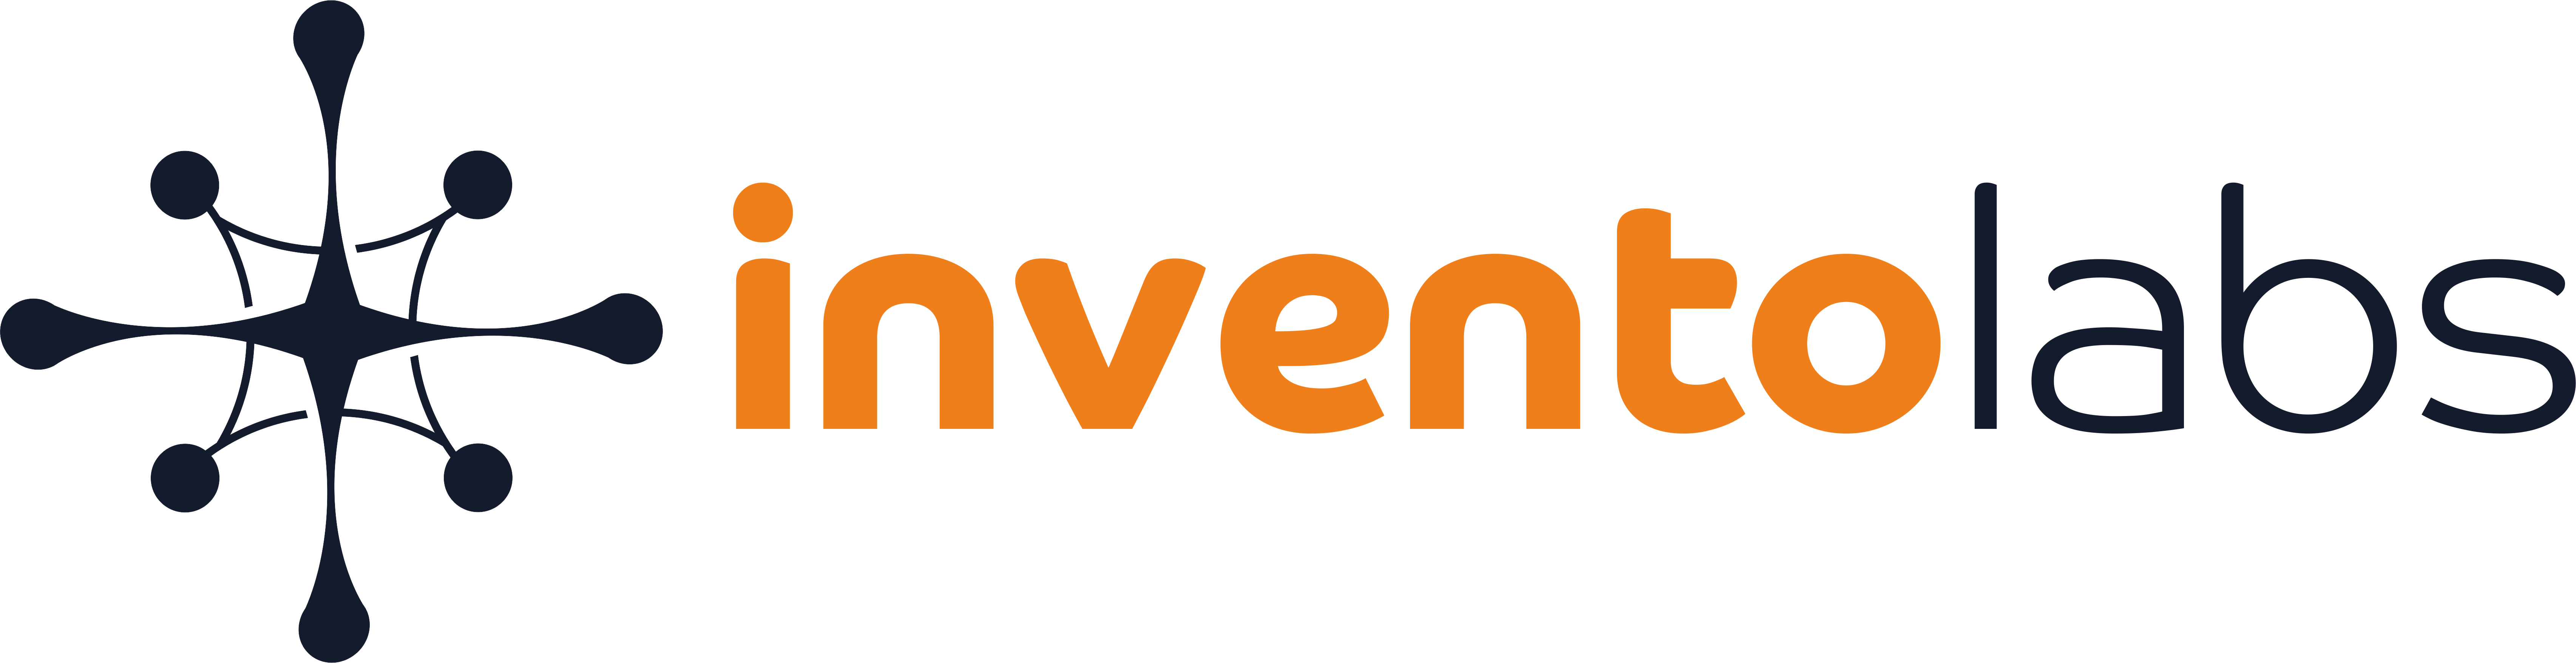 Invento Labs LLC profile on Qualified.One